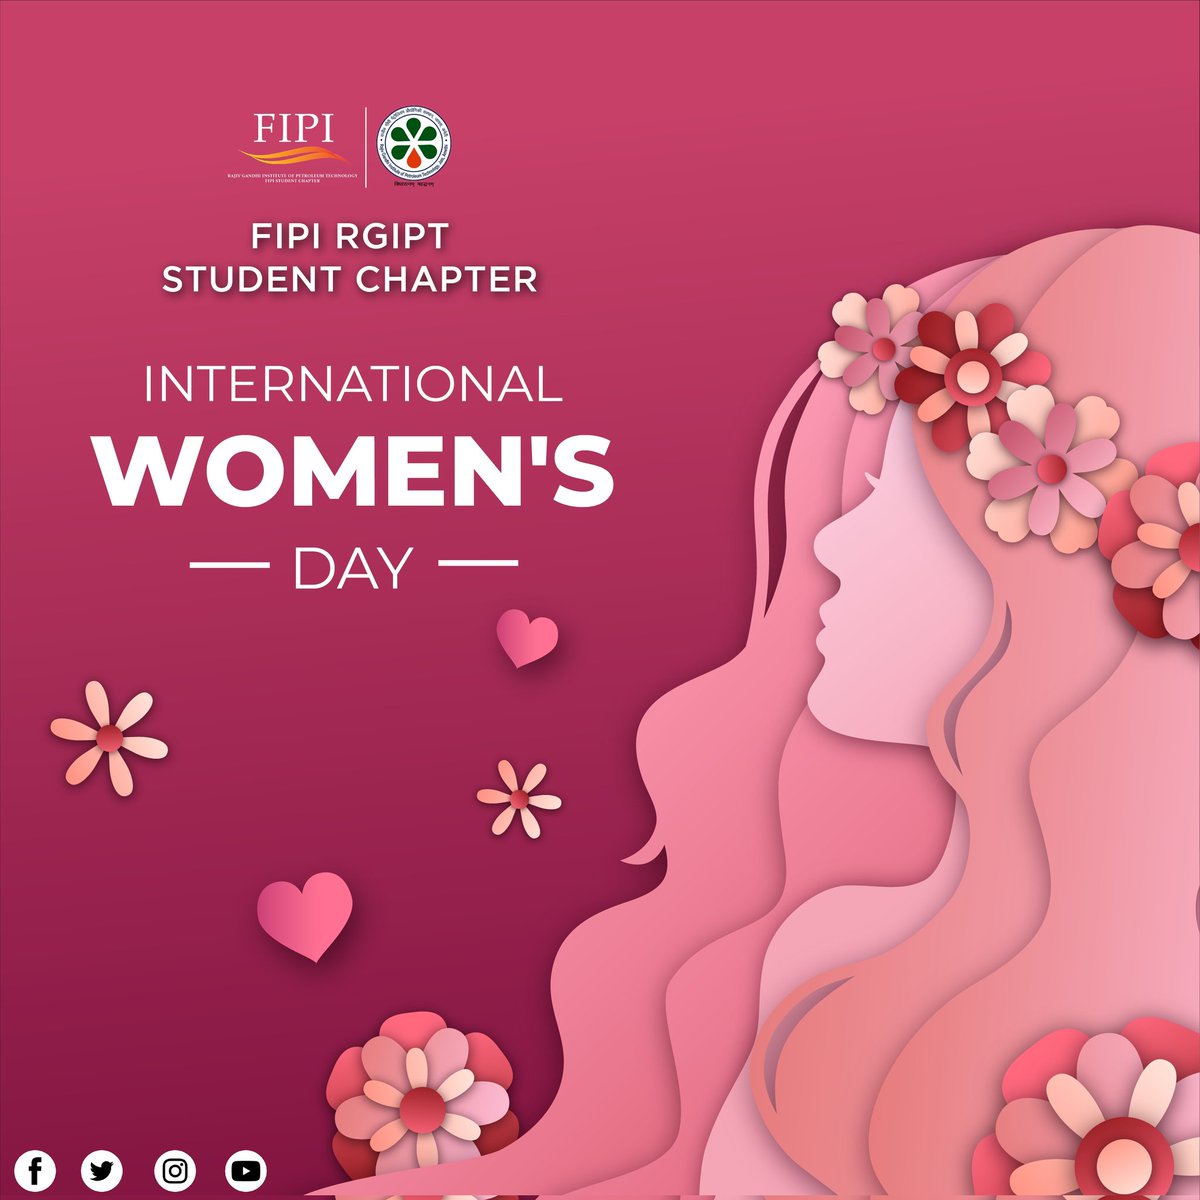 'Empowered women empower the world. Happy International Women's Day!'

'Happy Women's Day from FIPI RGIPT SC to the incredible women who inspire, lead, and make a difference every day. Your strength, resilience, and grace are celebrated today and always.'